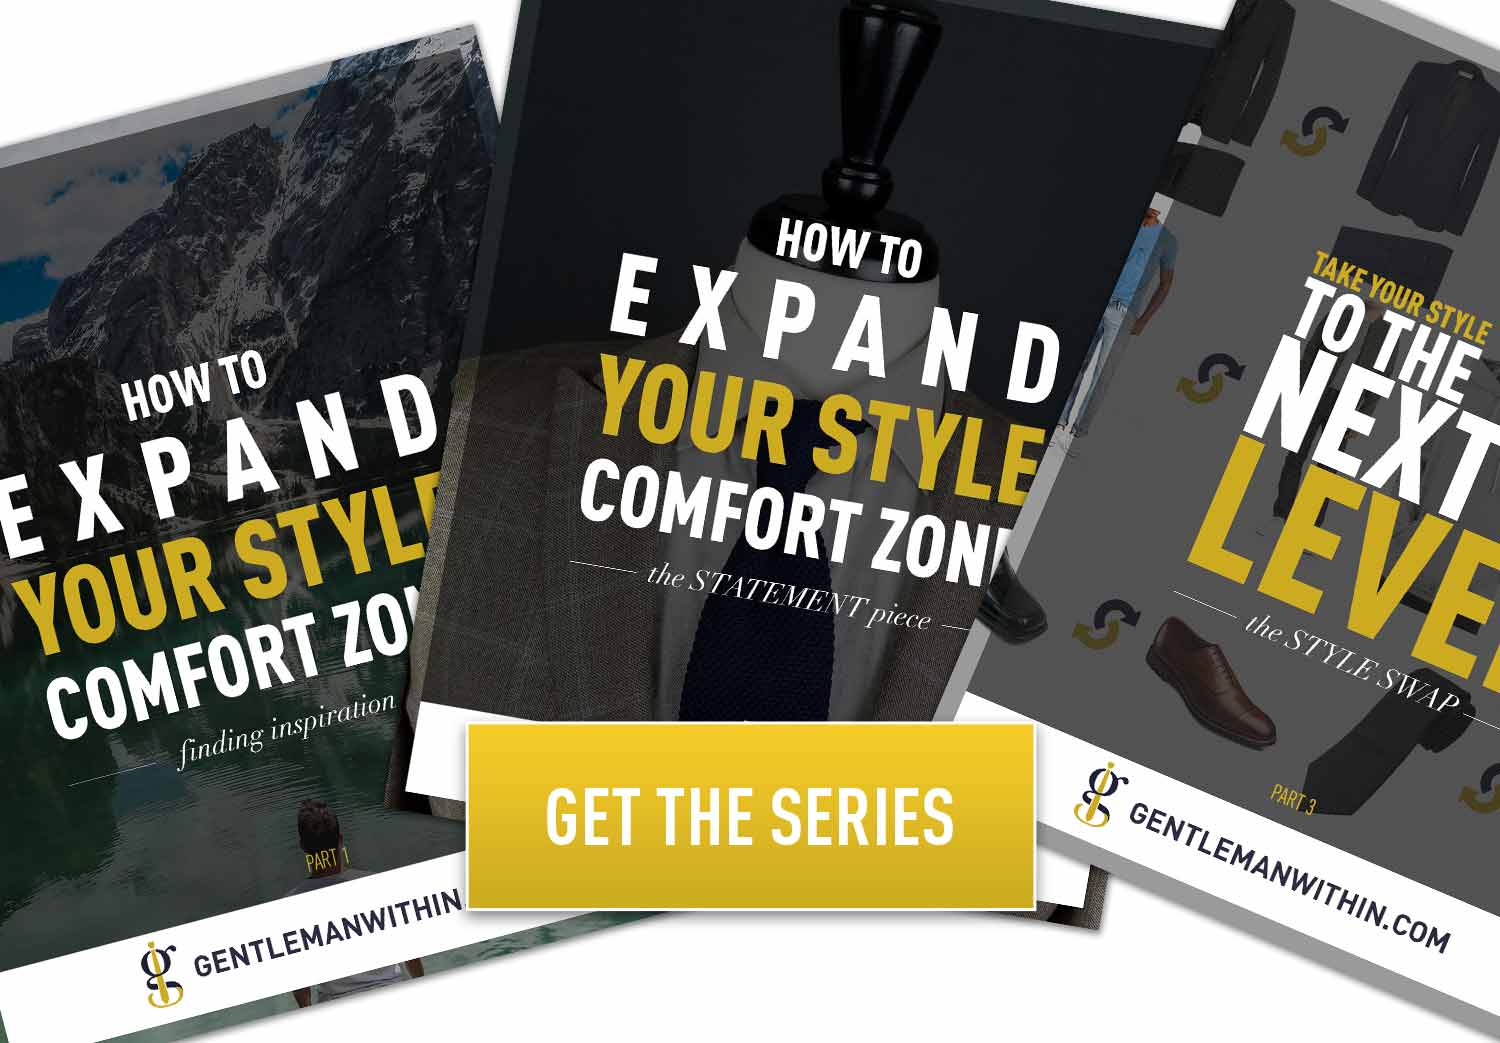 Expand Your Style Comfort Zone Series | GENTLEMAN WITHIN